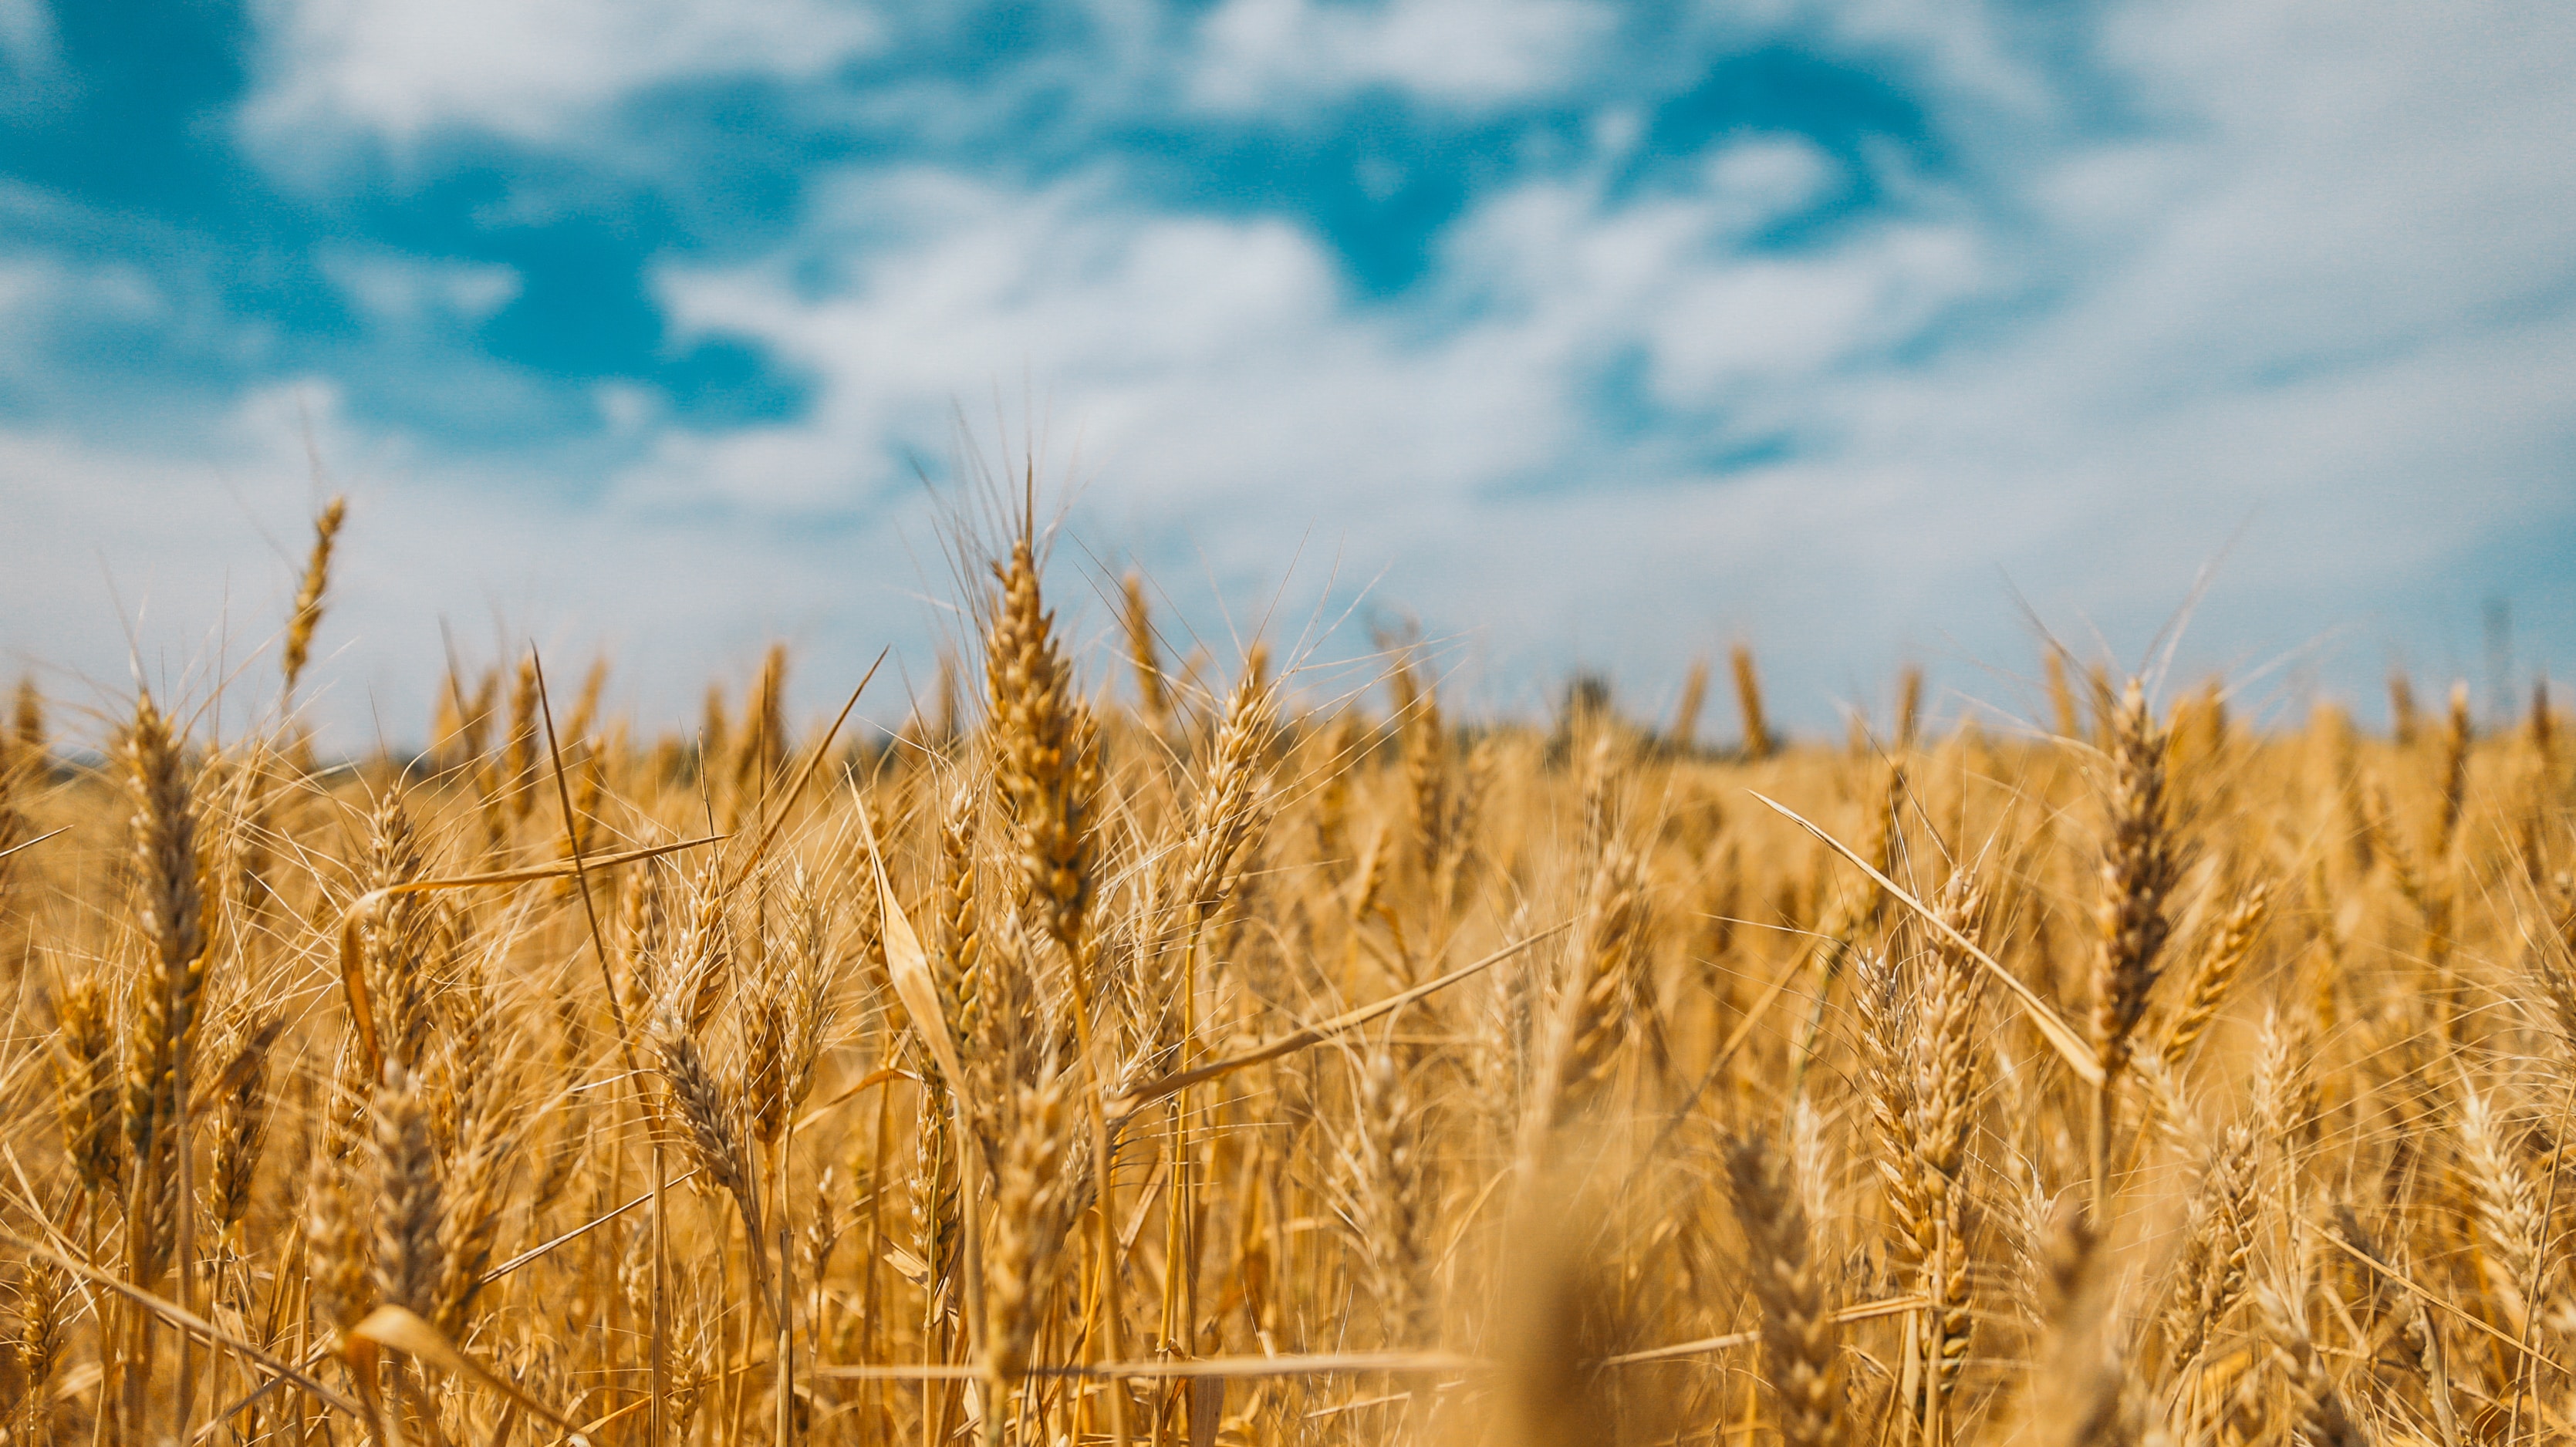 a field of golden wheat under a blue sky scattered with white clouds